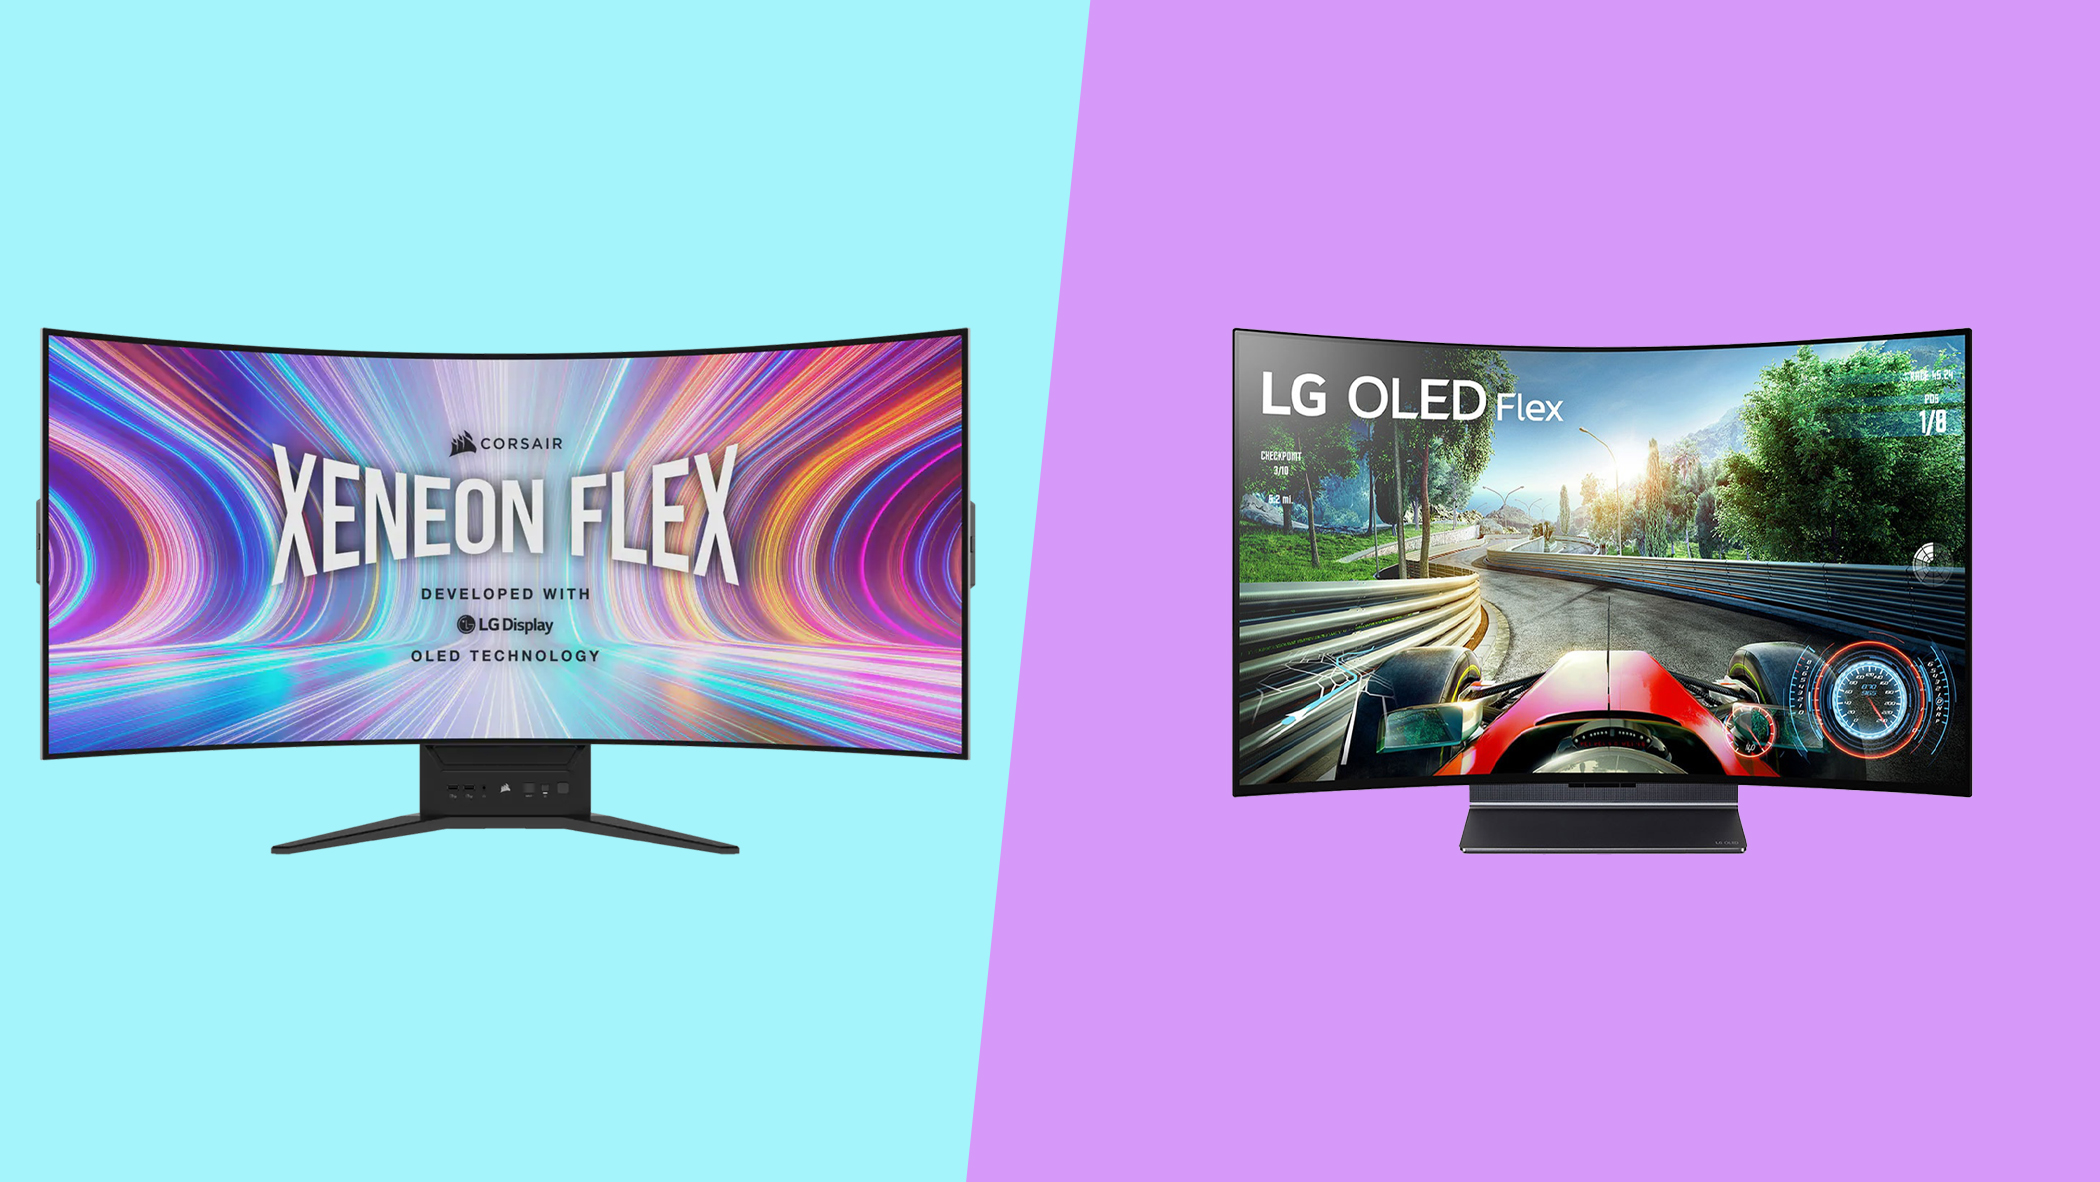 LG UltraWide Monitors vs Samsung Ultrawides: Which Is Better